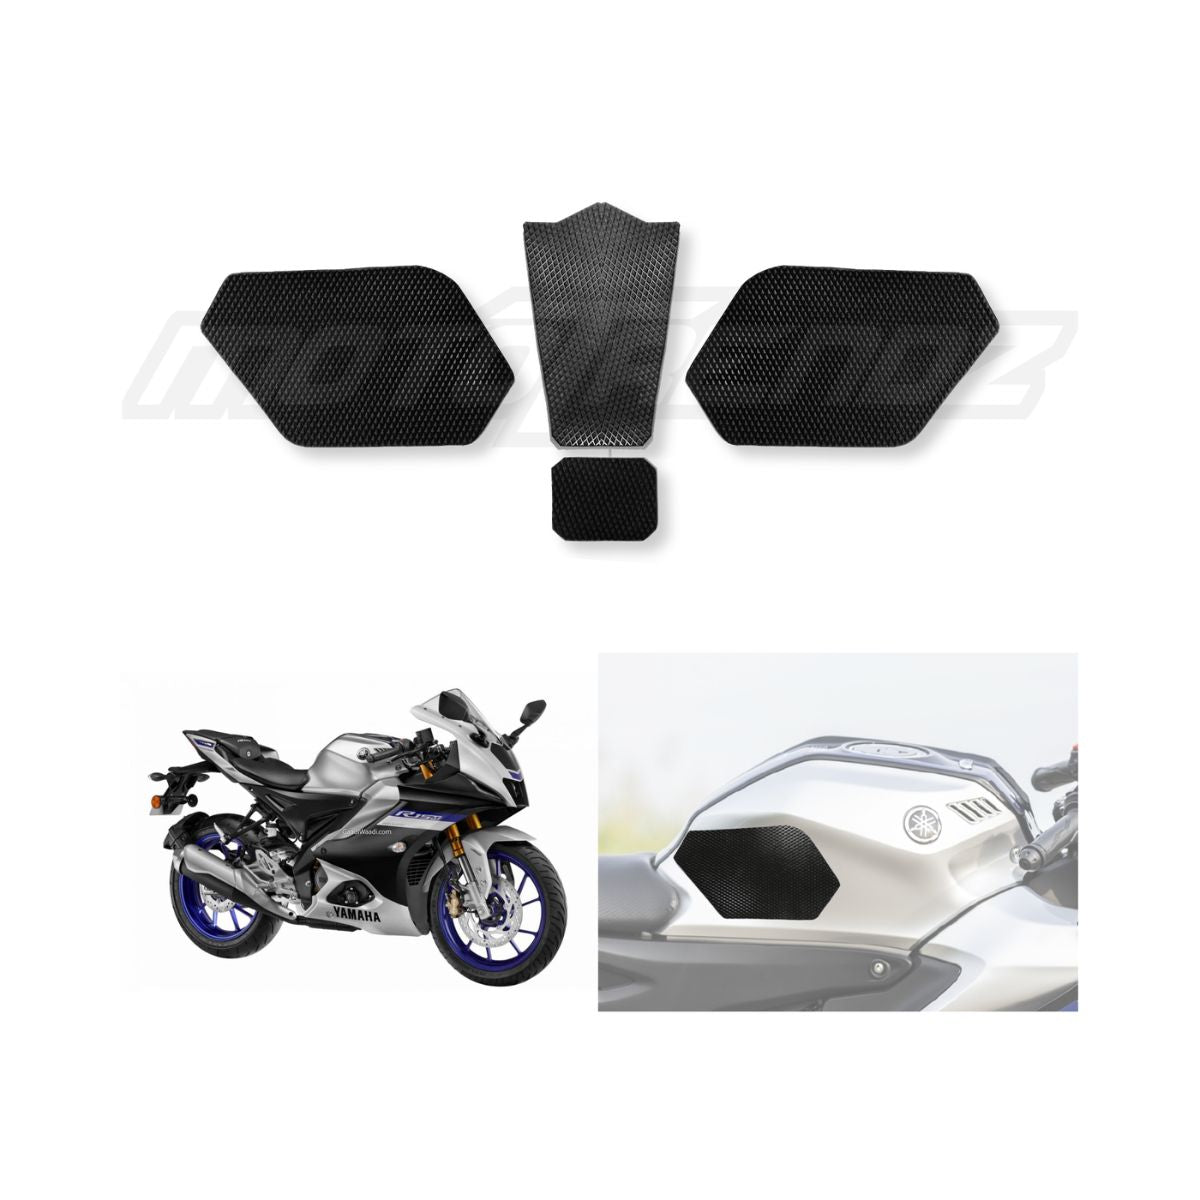 Traction Pads for Yamaha R15 V4/R15 M 1